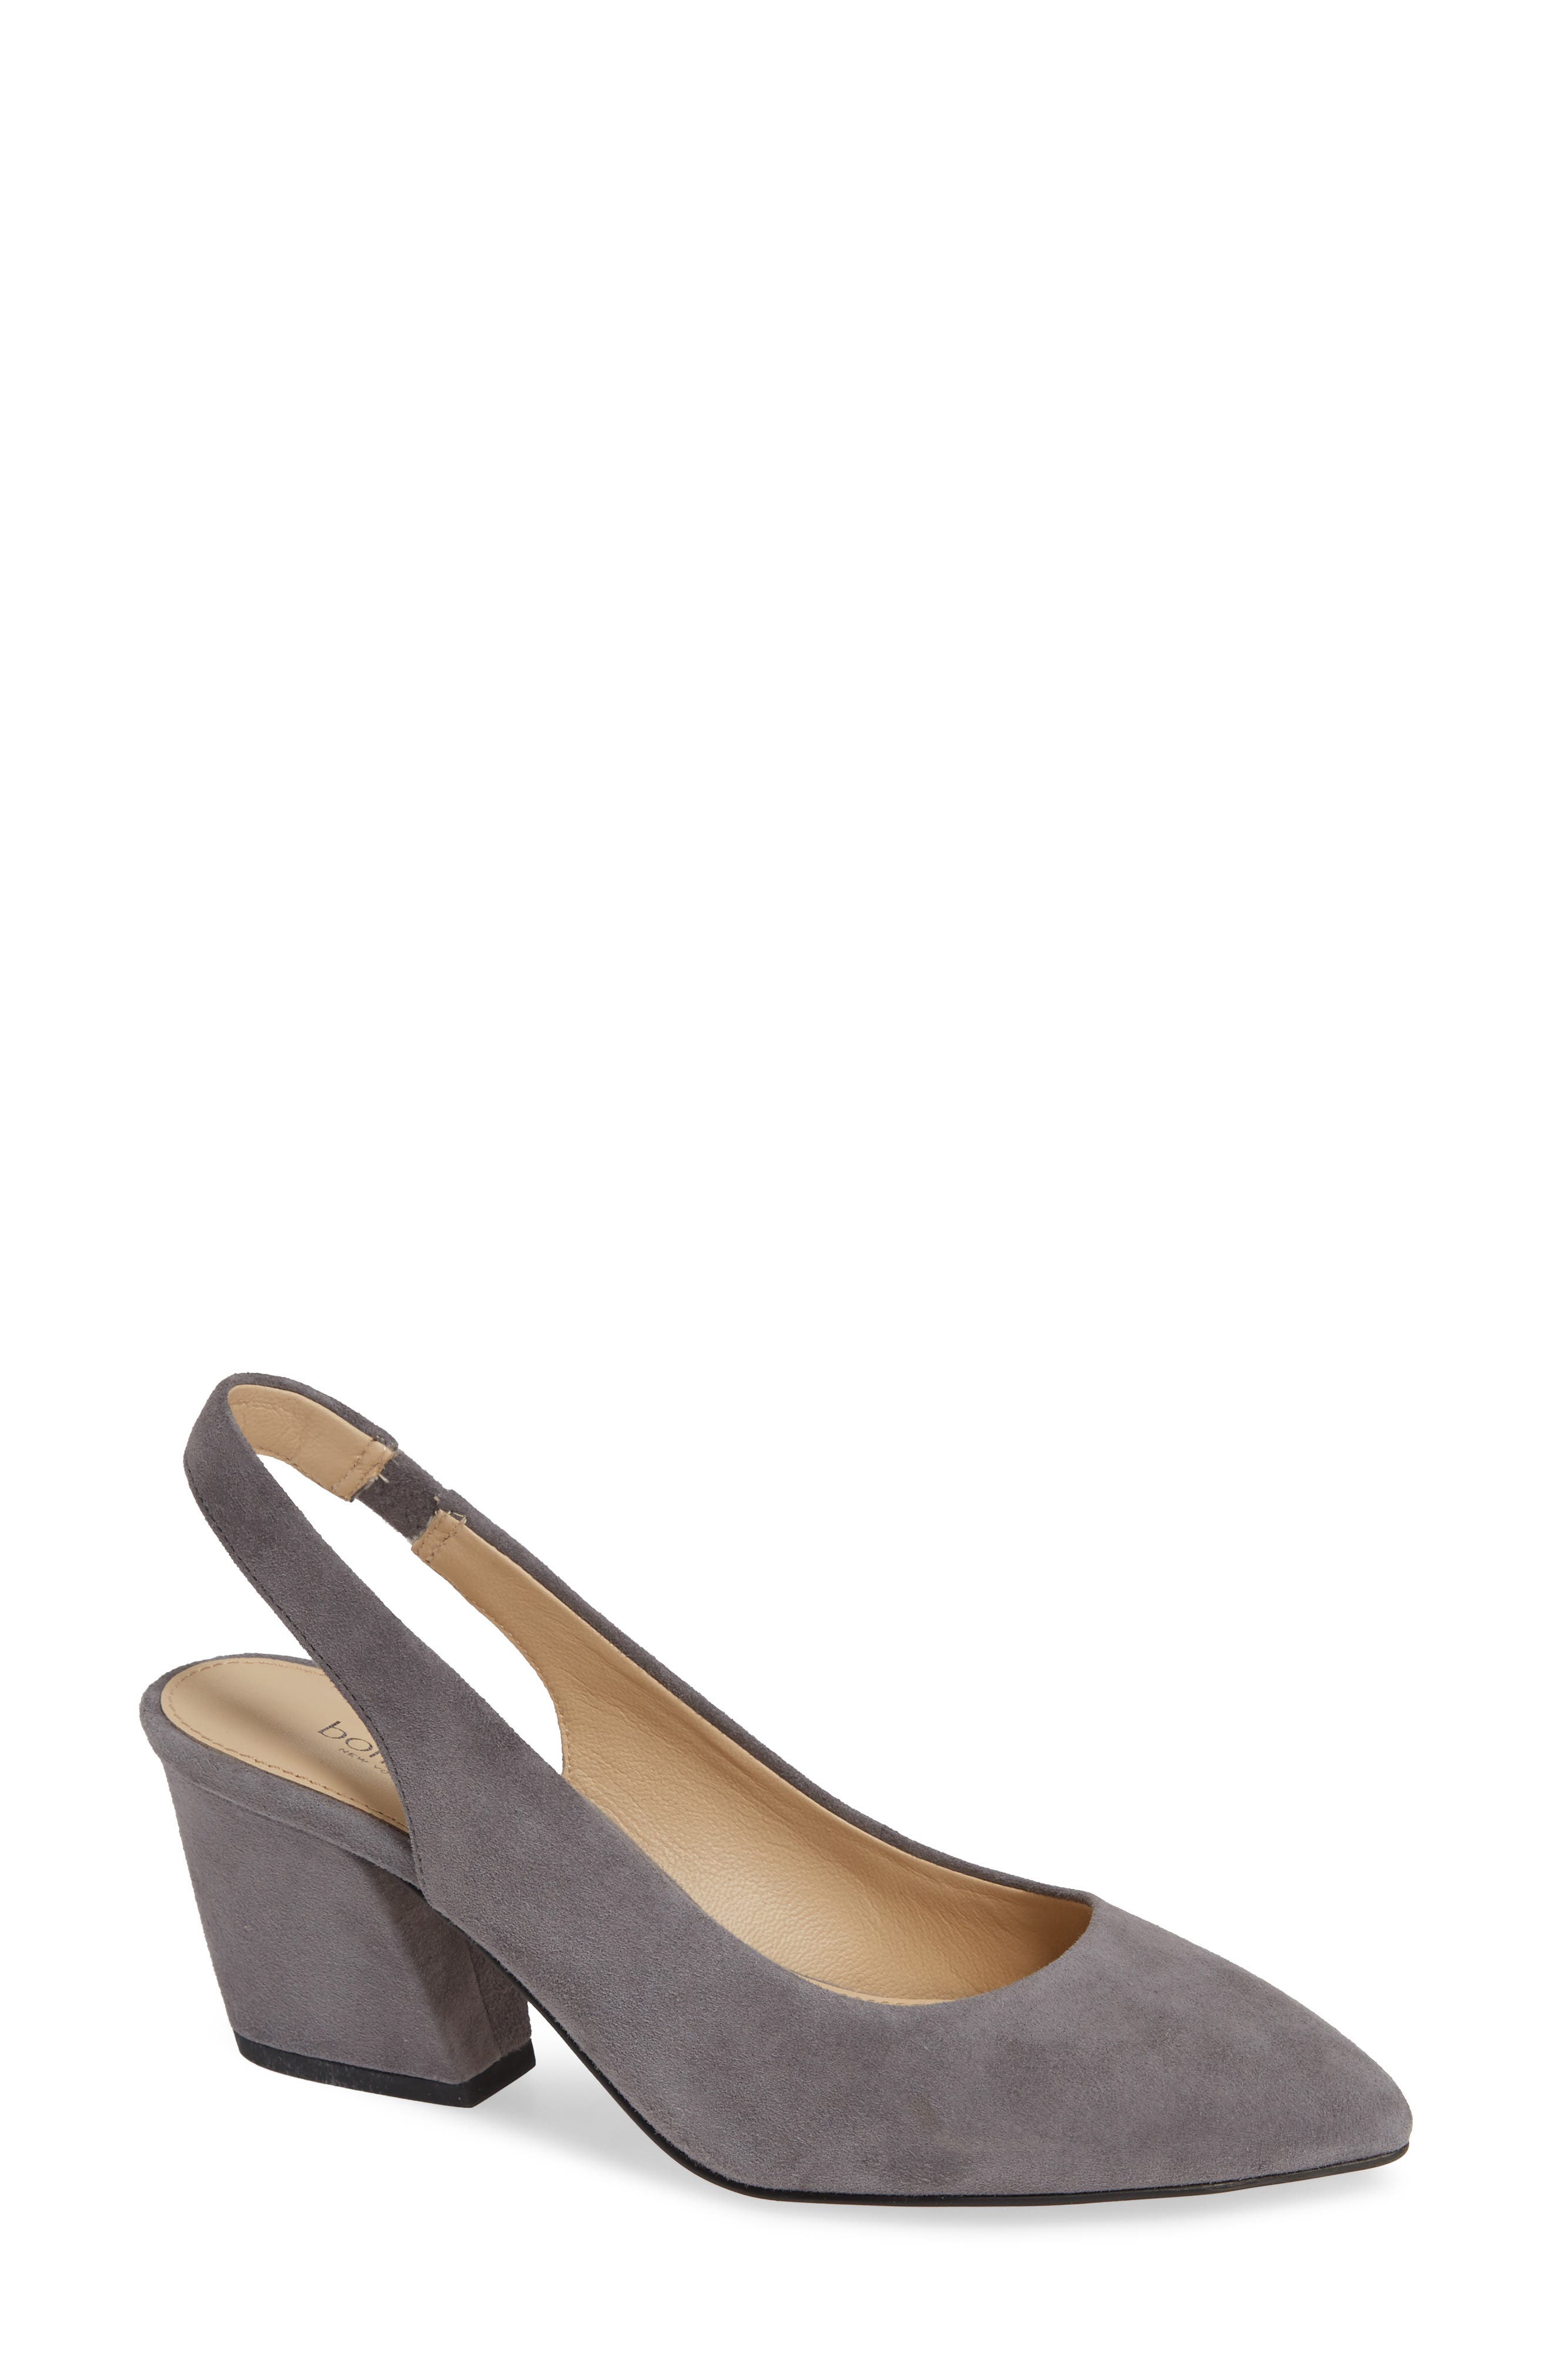 Botkier Shayla Suede Slingback Pump In French Grey-fgr